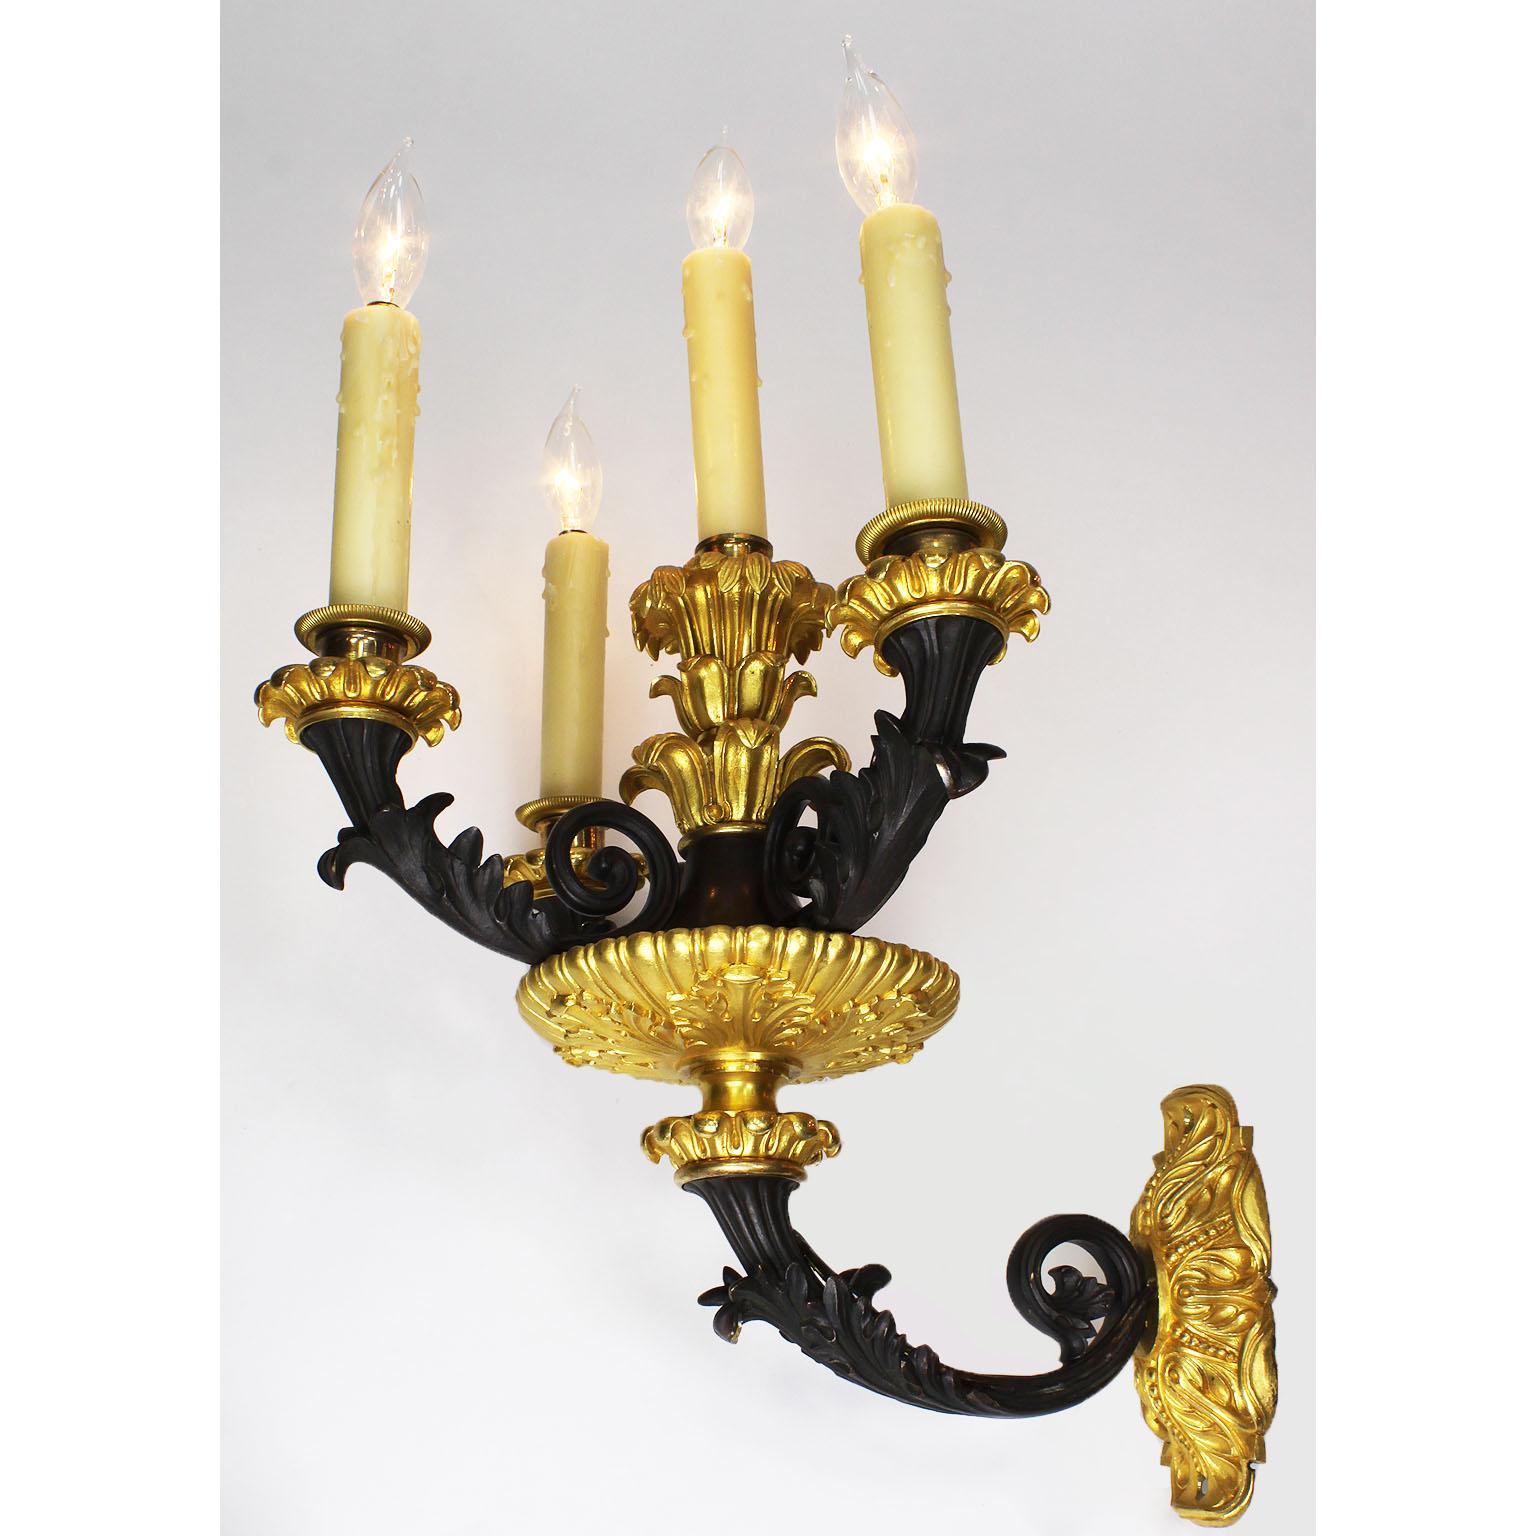 French 19th Century Neoclassical Empire Revival Style Bronze Wall Sconces, Pair For Sale 1